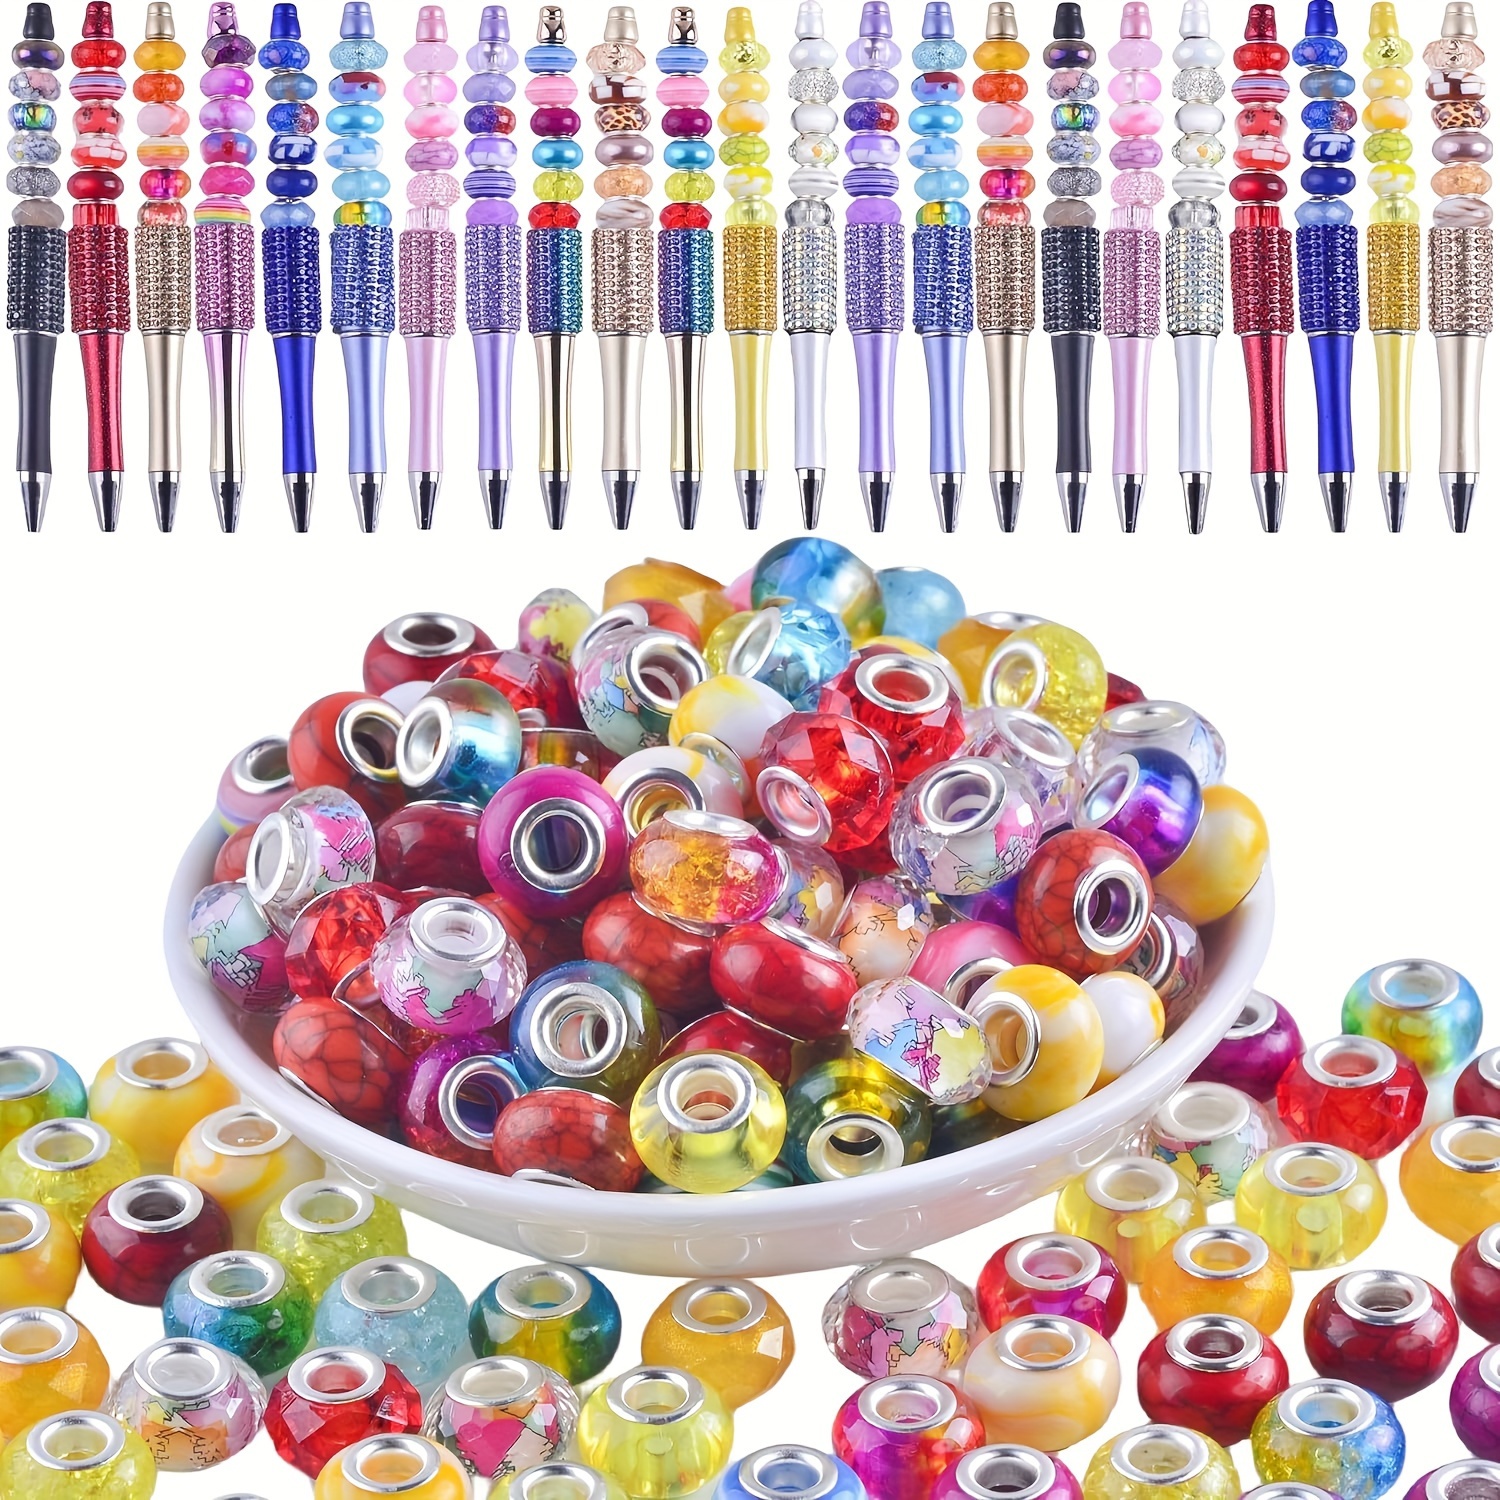 

100pcs Multicolor 14mm Large Hole Glass Beads - Murano Style Spacer Beads For Diy Jewelry, Lampwork Pens & Crafts